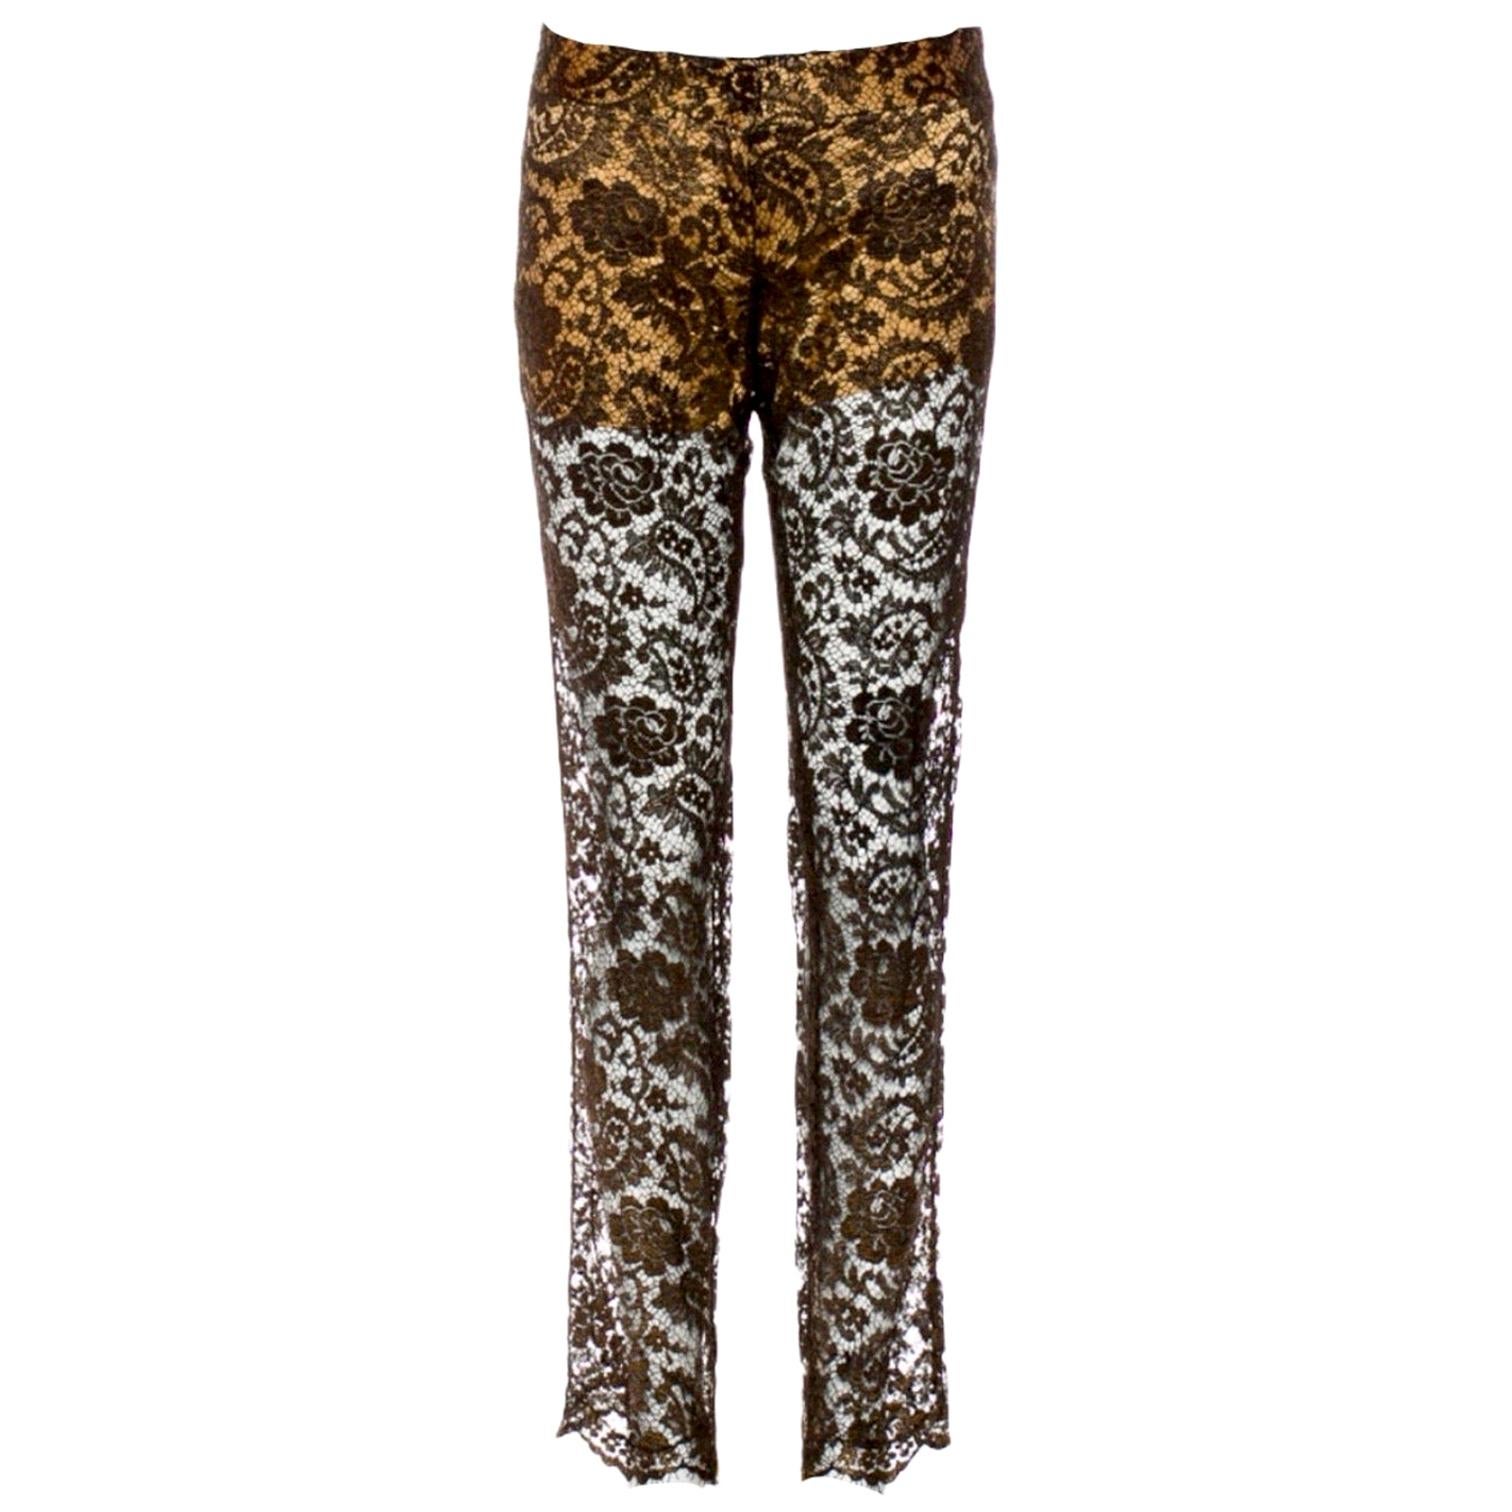 NEW Dolce & Gabbana Gold-Coated Semi Sheer Lace & Silk Pants Trousers 40